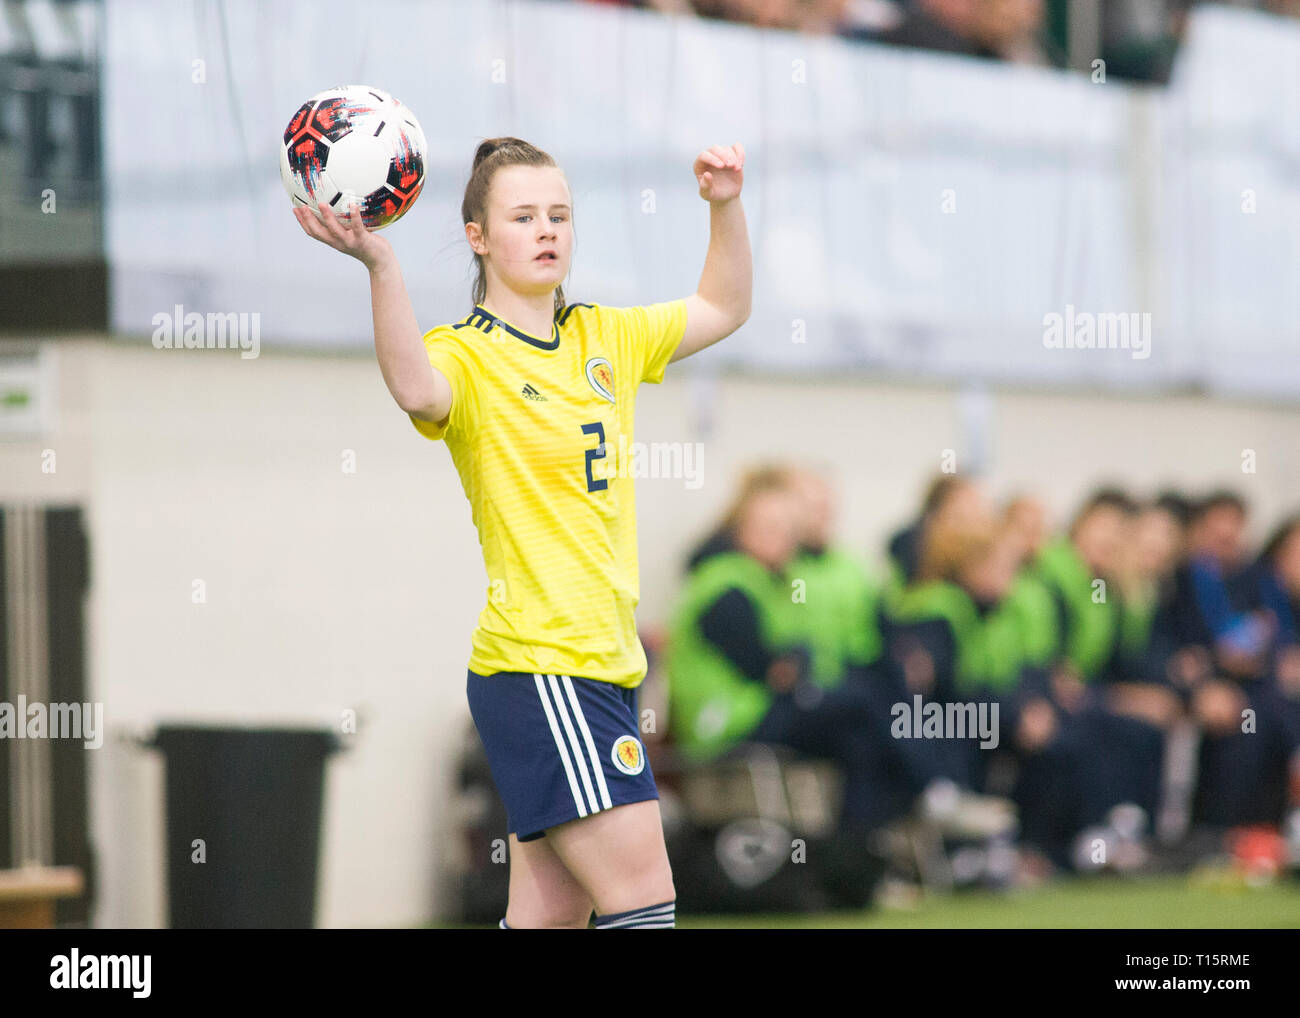 Edinburgh, Scotland - March 23: Chloe Warrington of Scotland during the UEFA Elite Round match between Scotland U17 Girl's and Norway U17 Girl's at Oriam Scotland, on March 23, 2019 in Edinburgh, Scotland. (Photo by Scottish Borders Media/Alamy Live News)  Editorial use only, license required for commercial use. No use in betting. Stock Photo